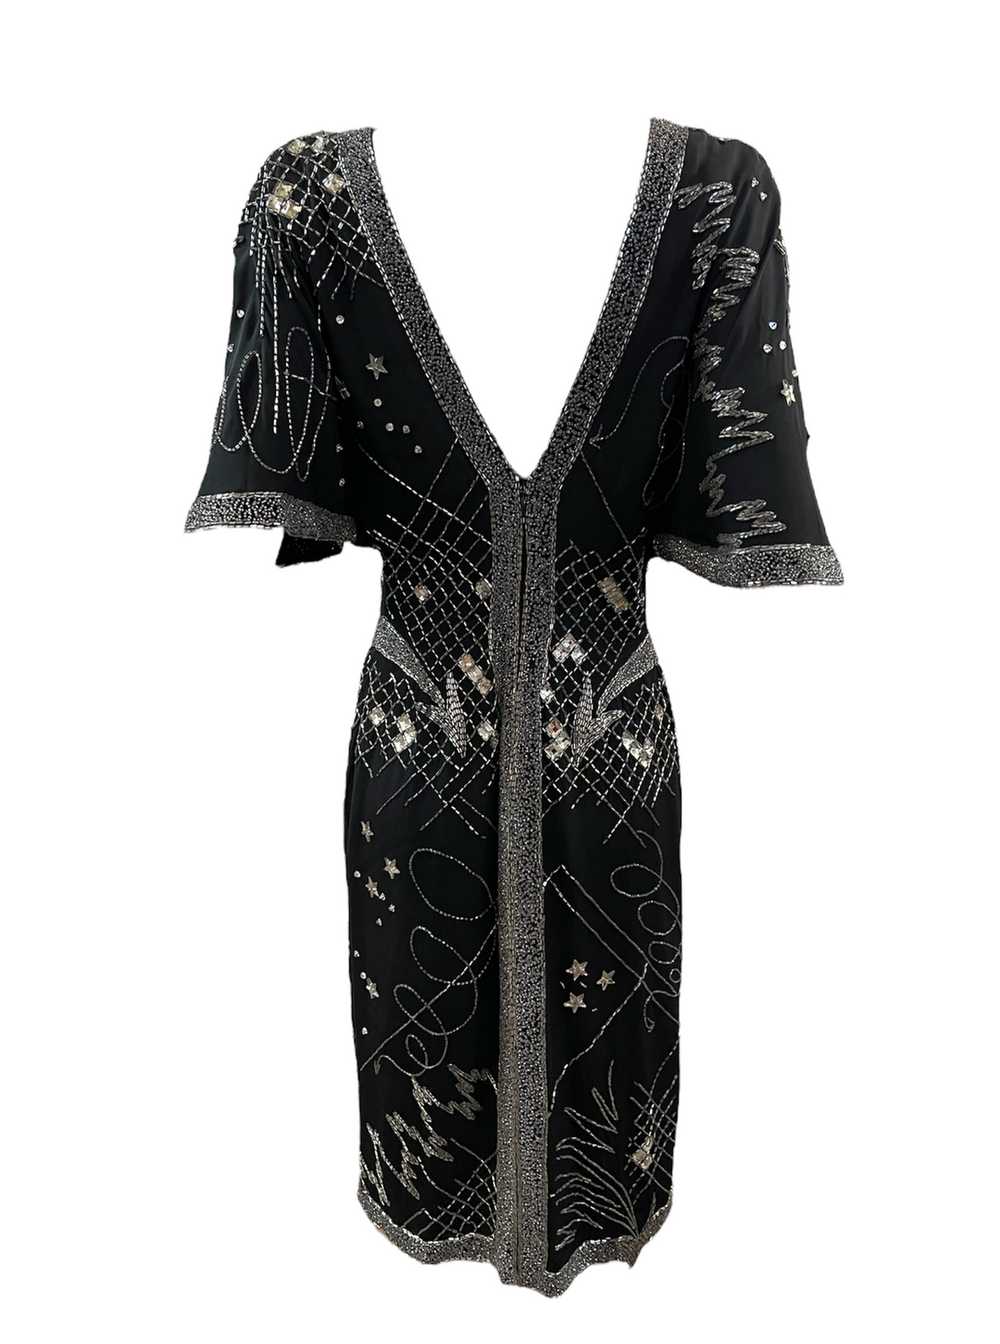 Fabrice 80s Black Beaded Cocktail Dress with Stars - image 3